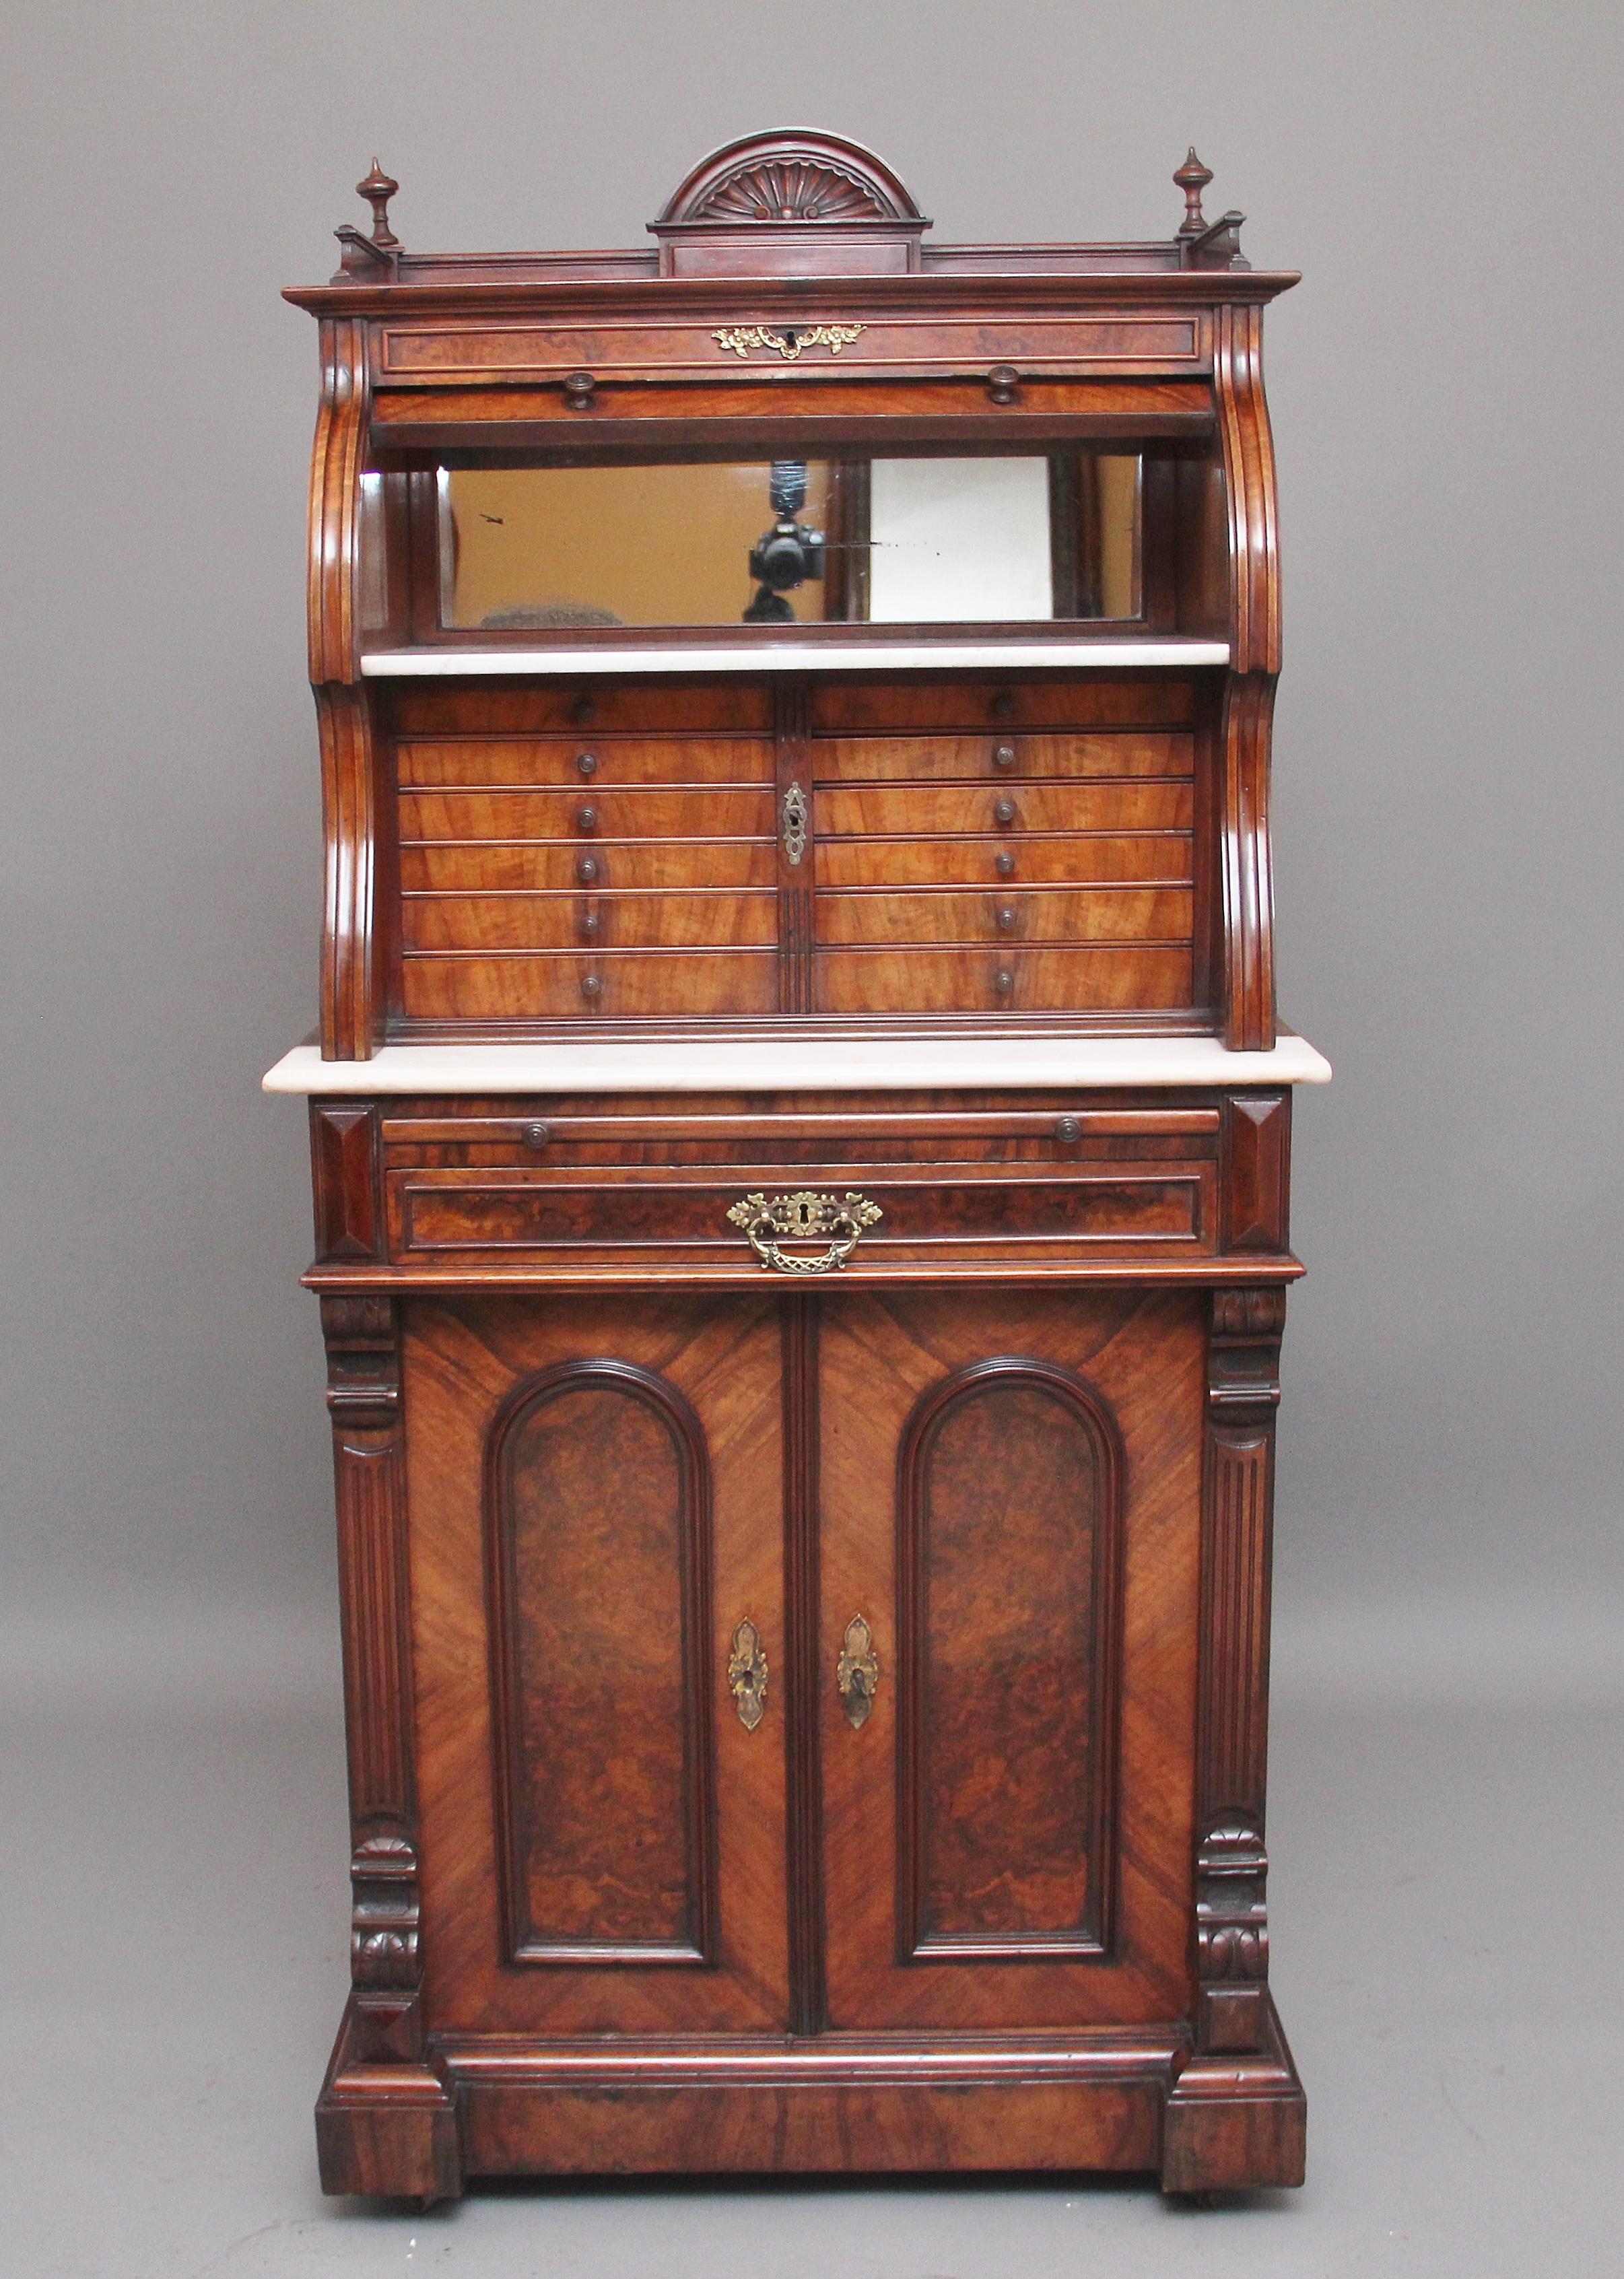 19th century burr walnut dentist cabinet, the top section having a carved shell top gallery with decorative finials either side, the cylinder opening to reveal a mirror and white marble, twelve graduated burr walnut drawers with original turned